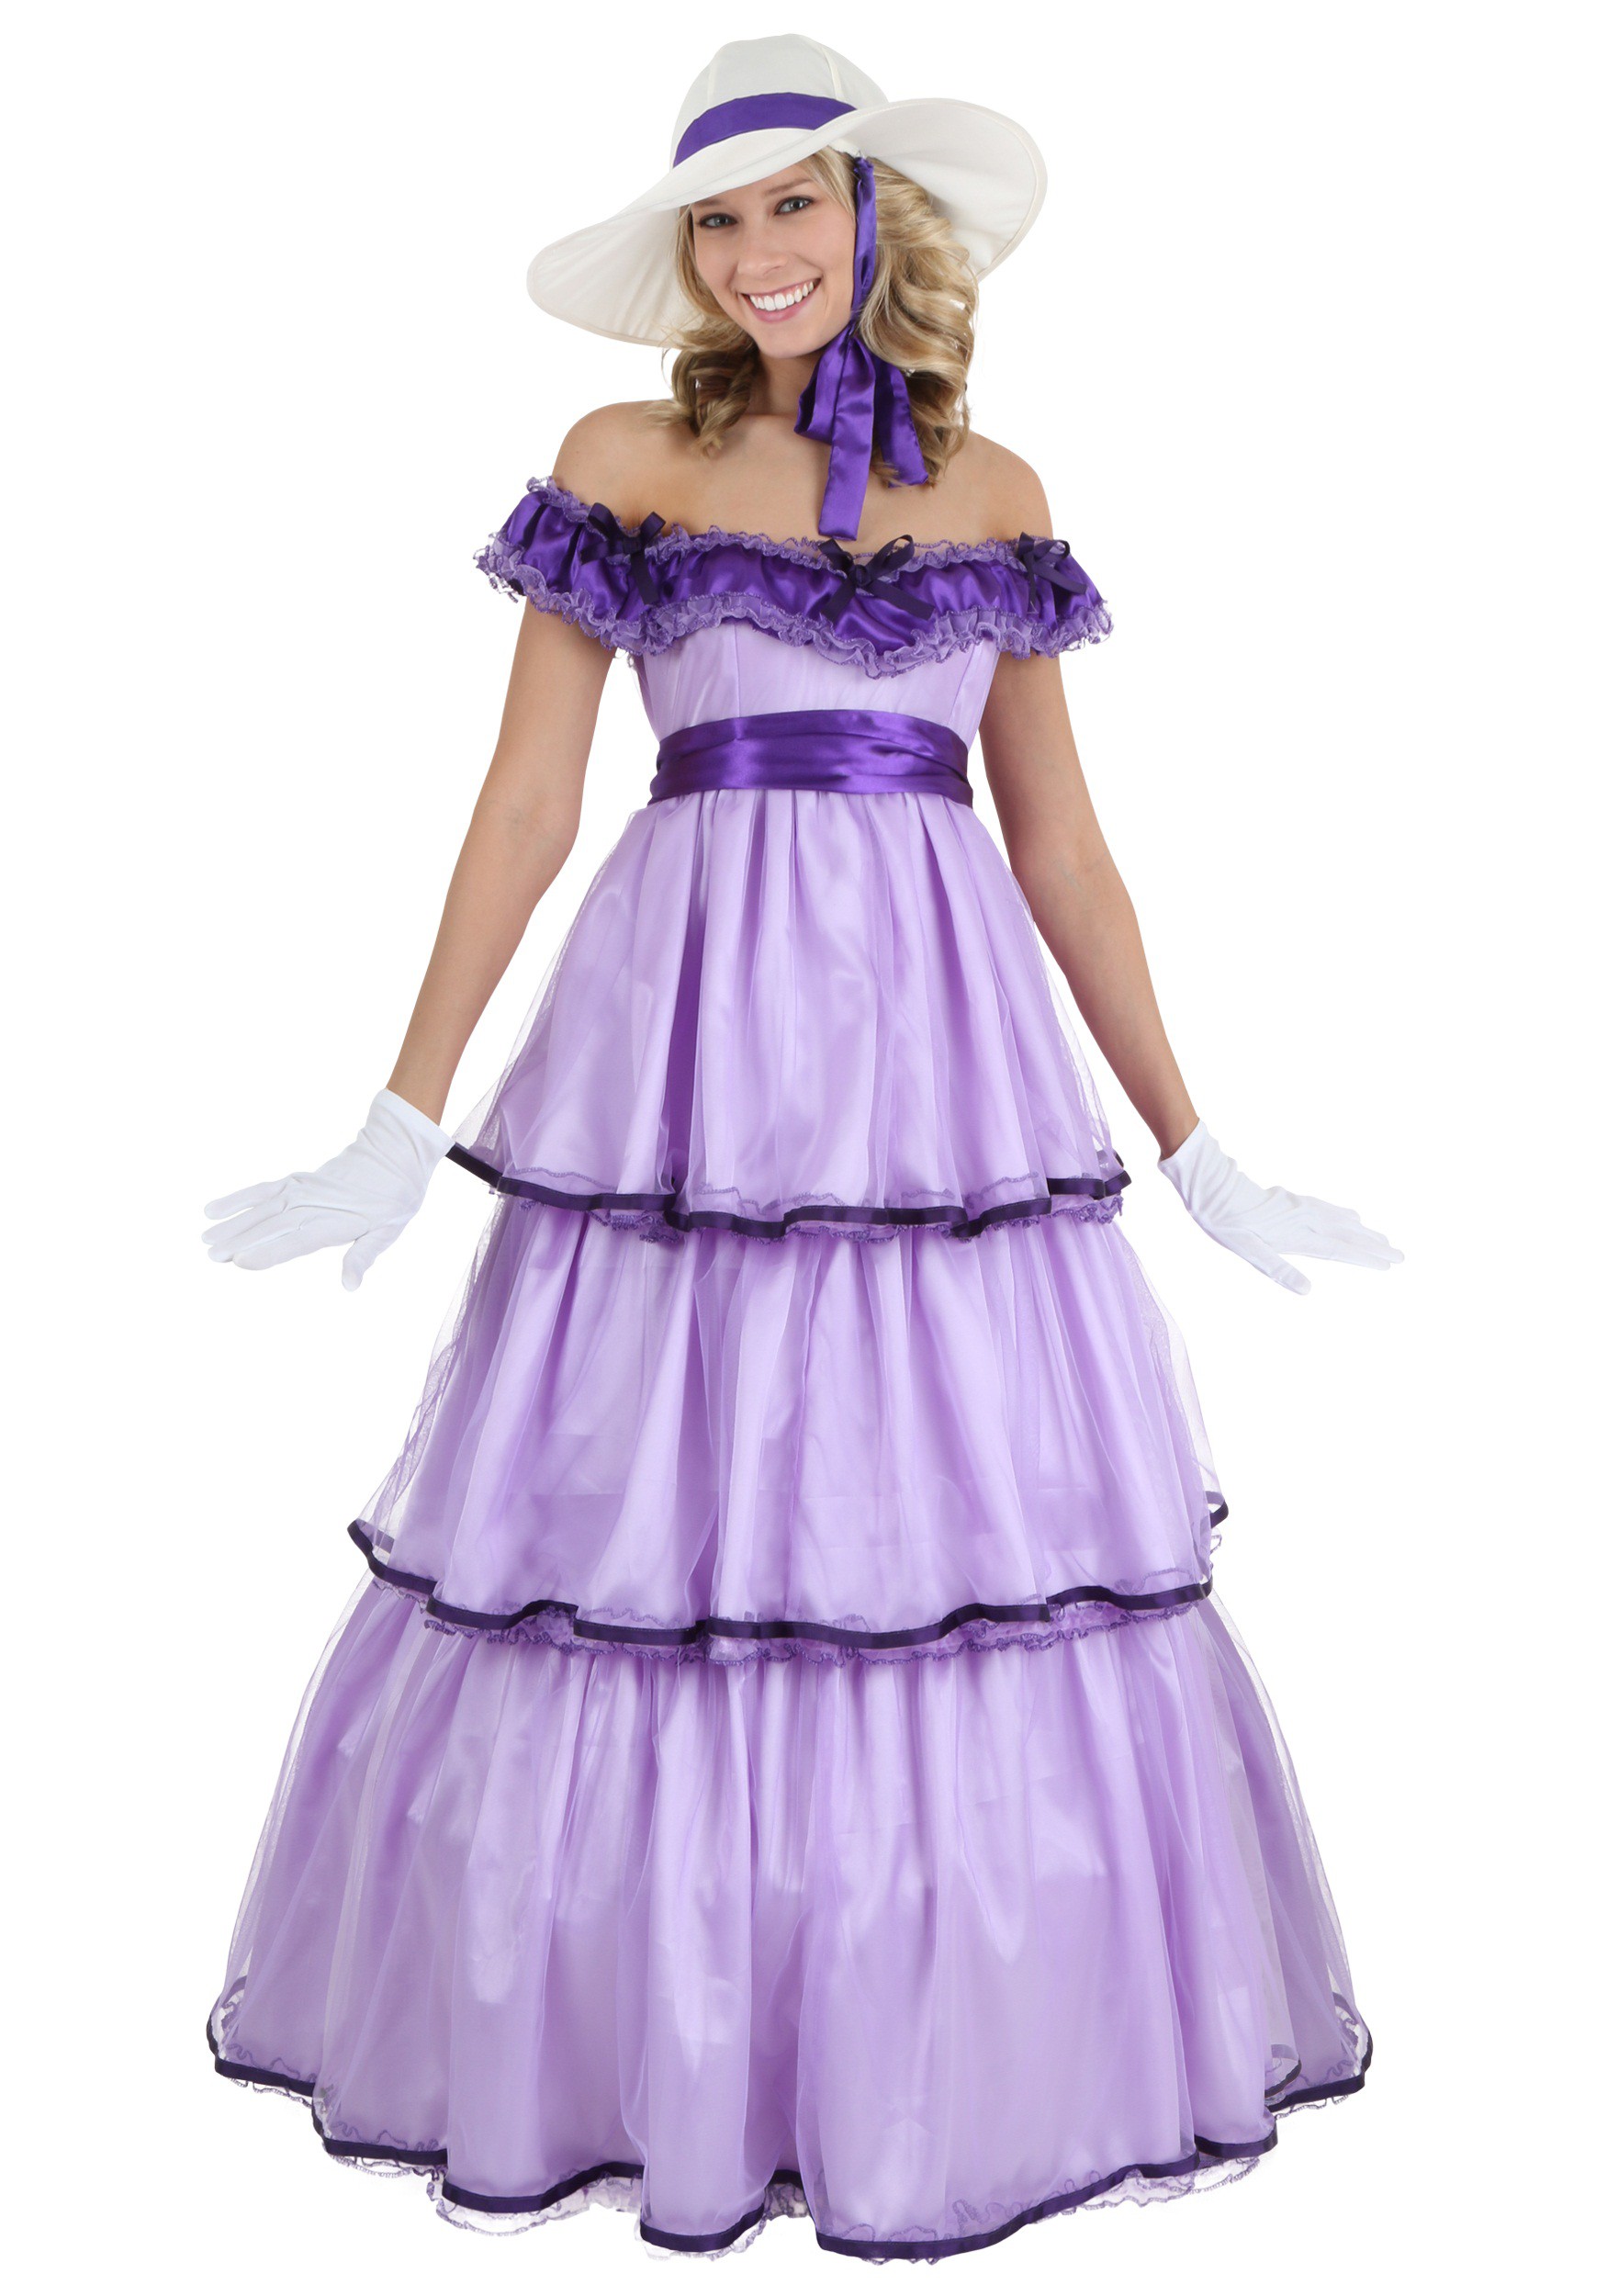 Plus Size Deluxe Southern Belle Women's Costume